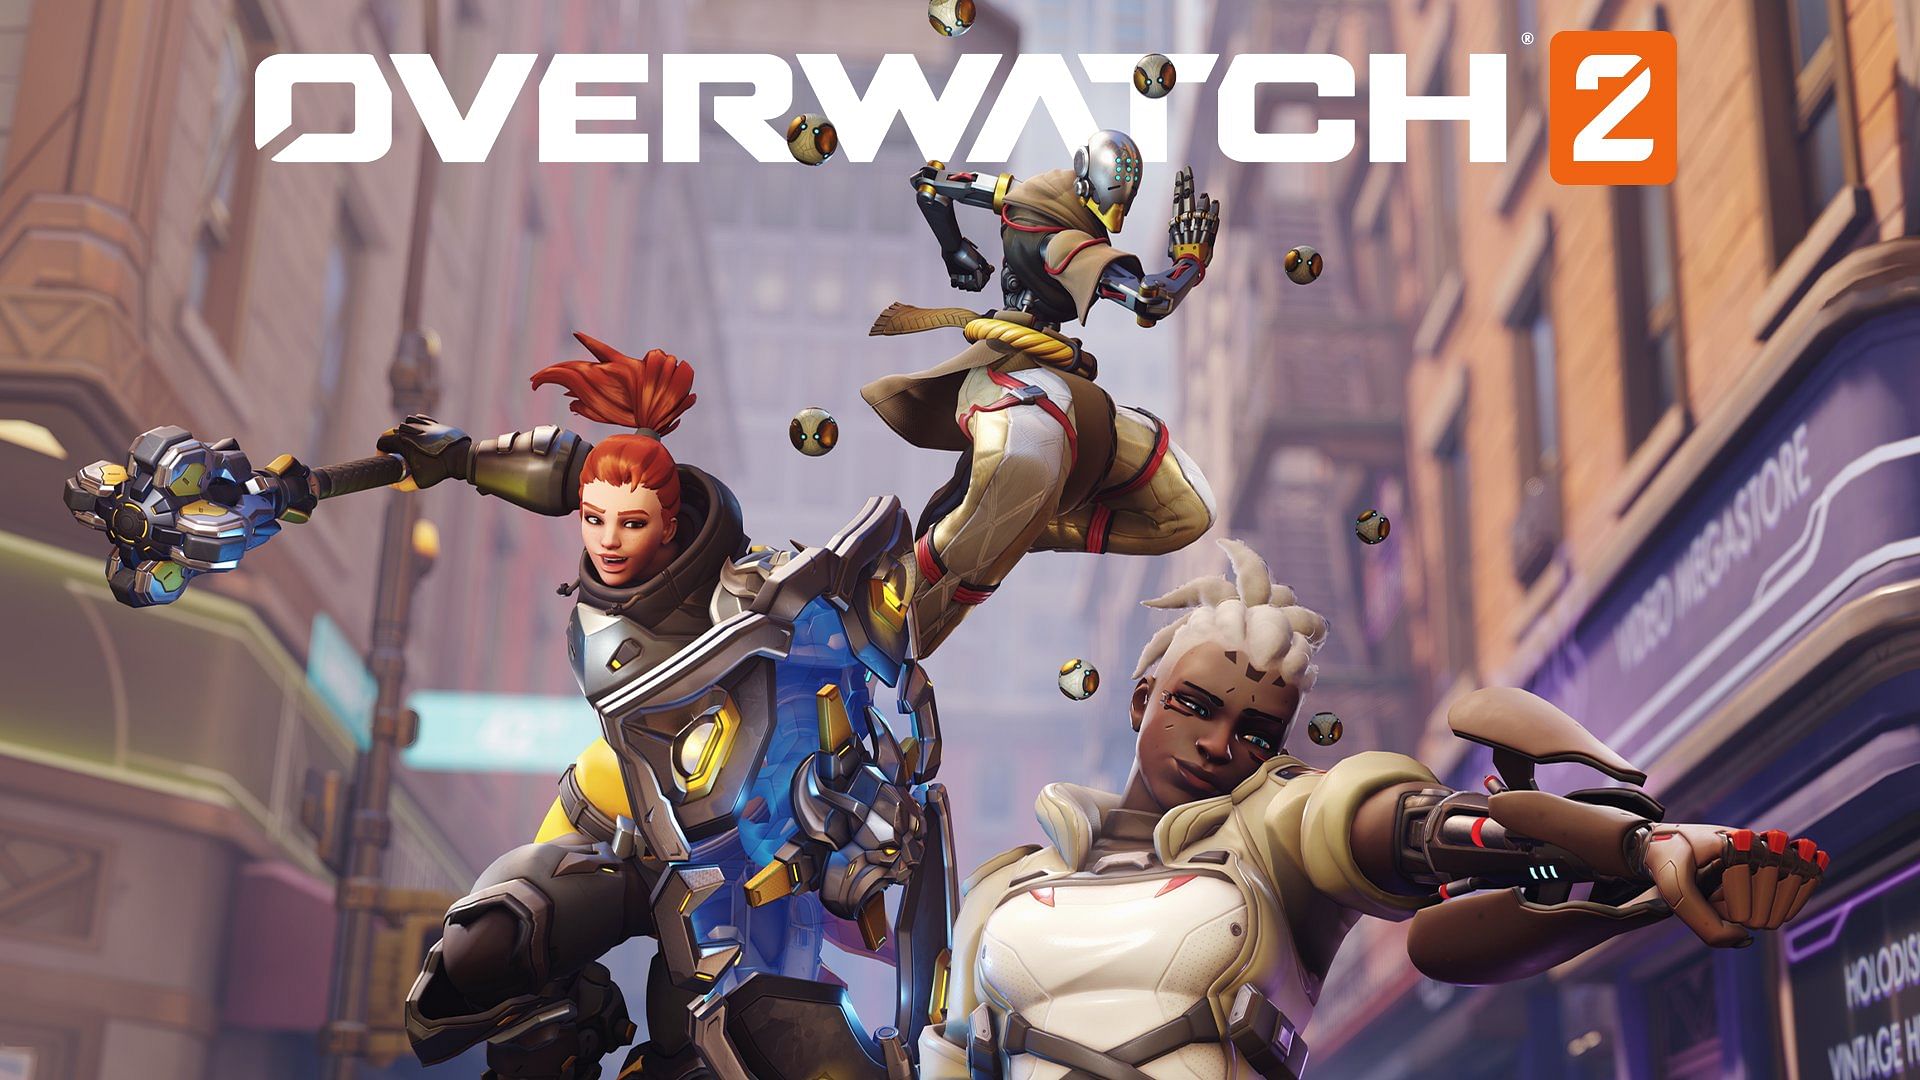 Overwatch 2 PvP Beta Confirmed. Here's how to sign up